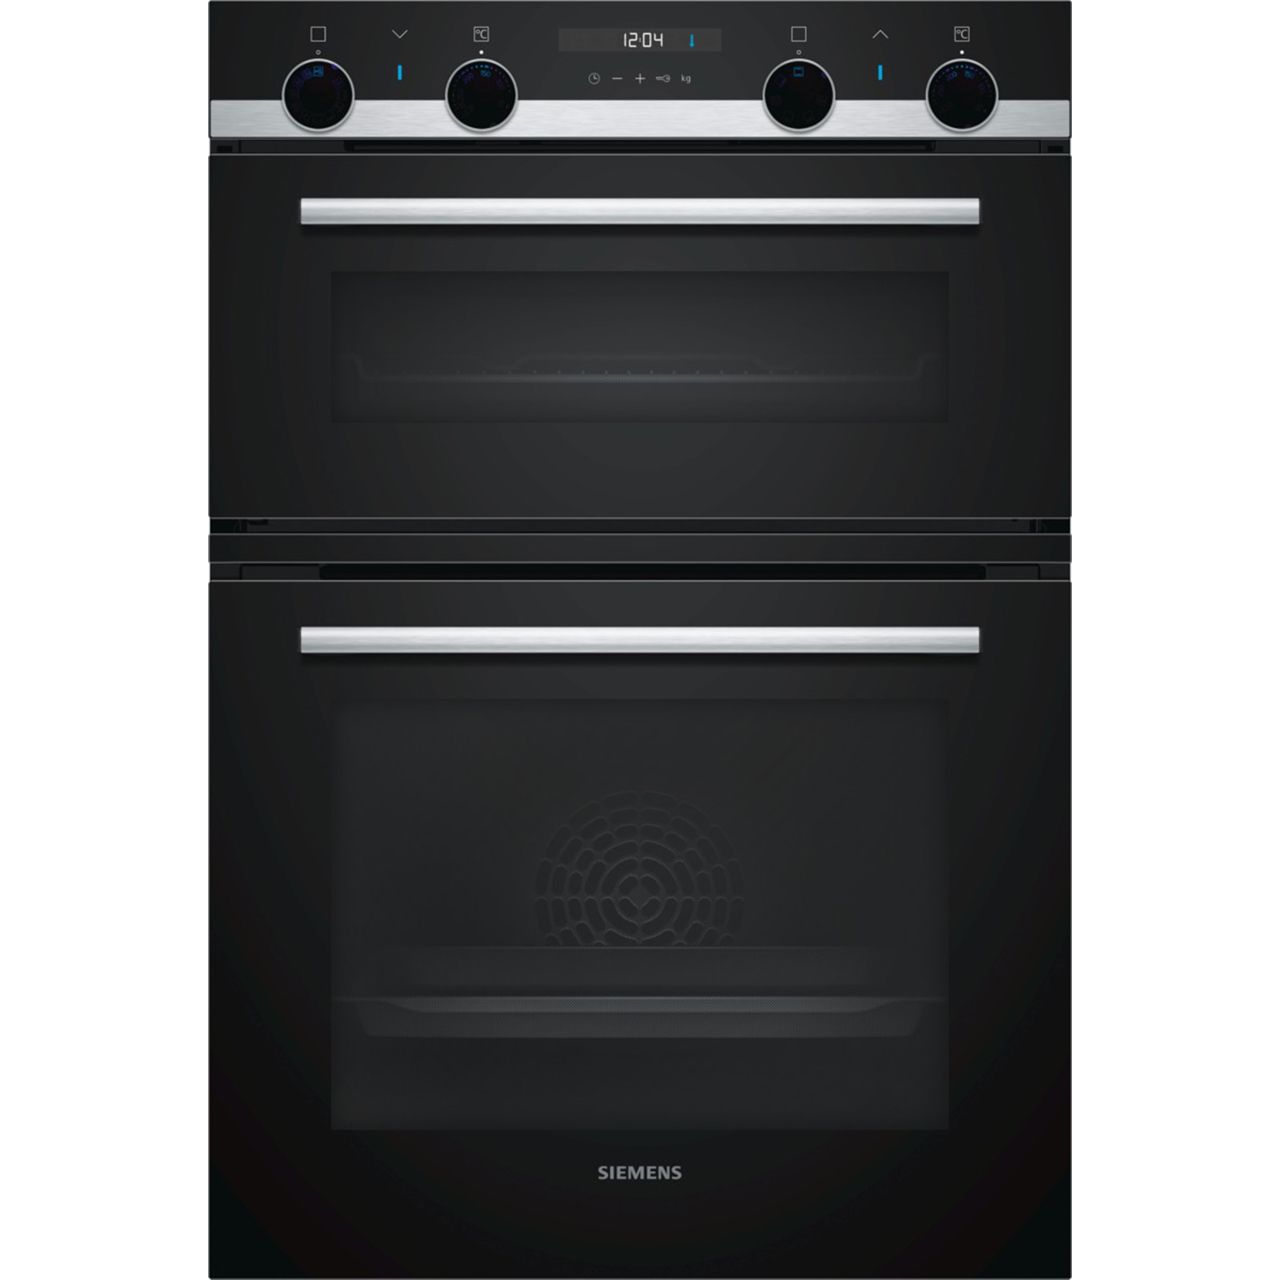 Siemens IQ-500 MB557G5S0B Built In Double Oven Review